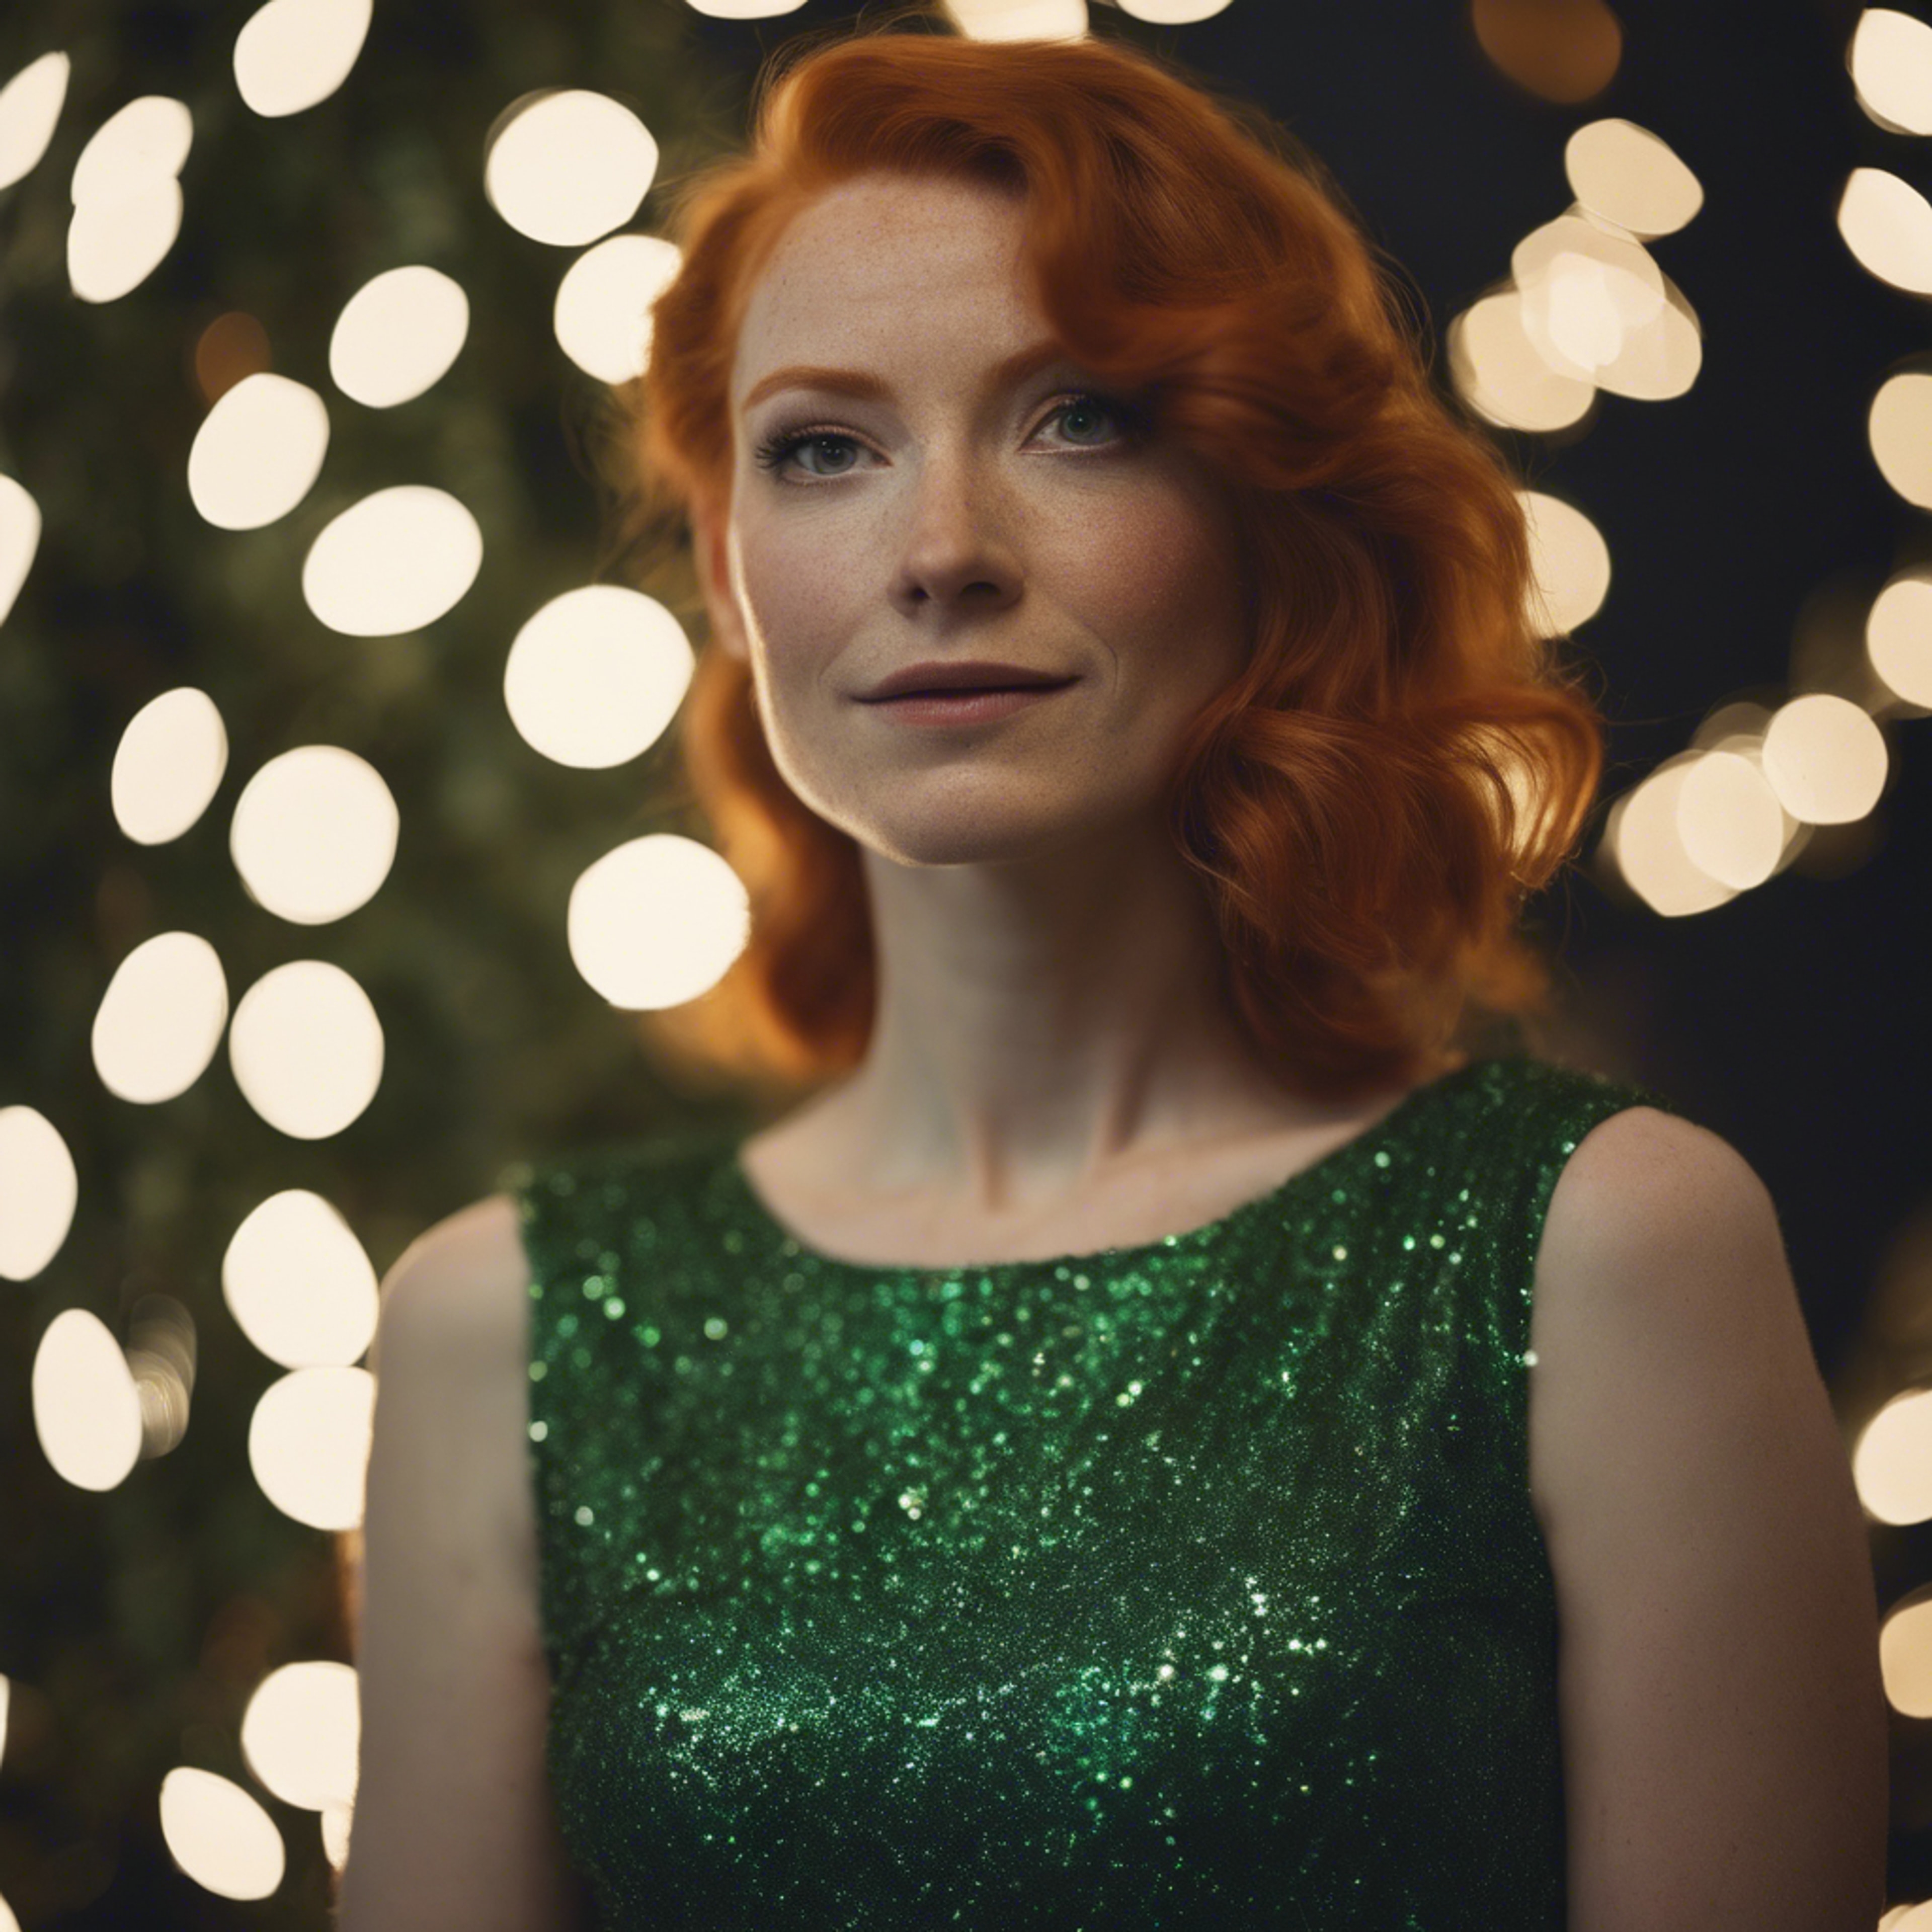 A redheaded woman wearing a sparkly green dress at a Christmas party Шпалери[a7aea6b7222f4d2facc9]